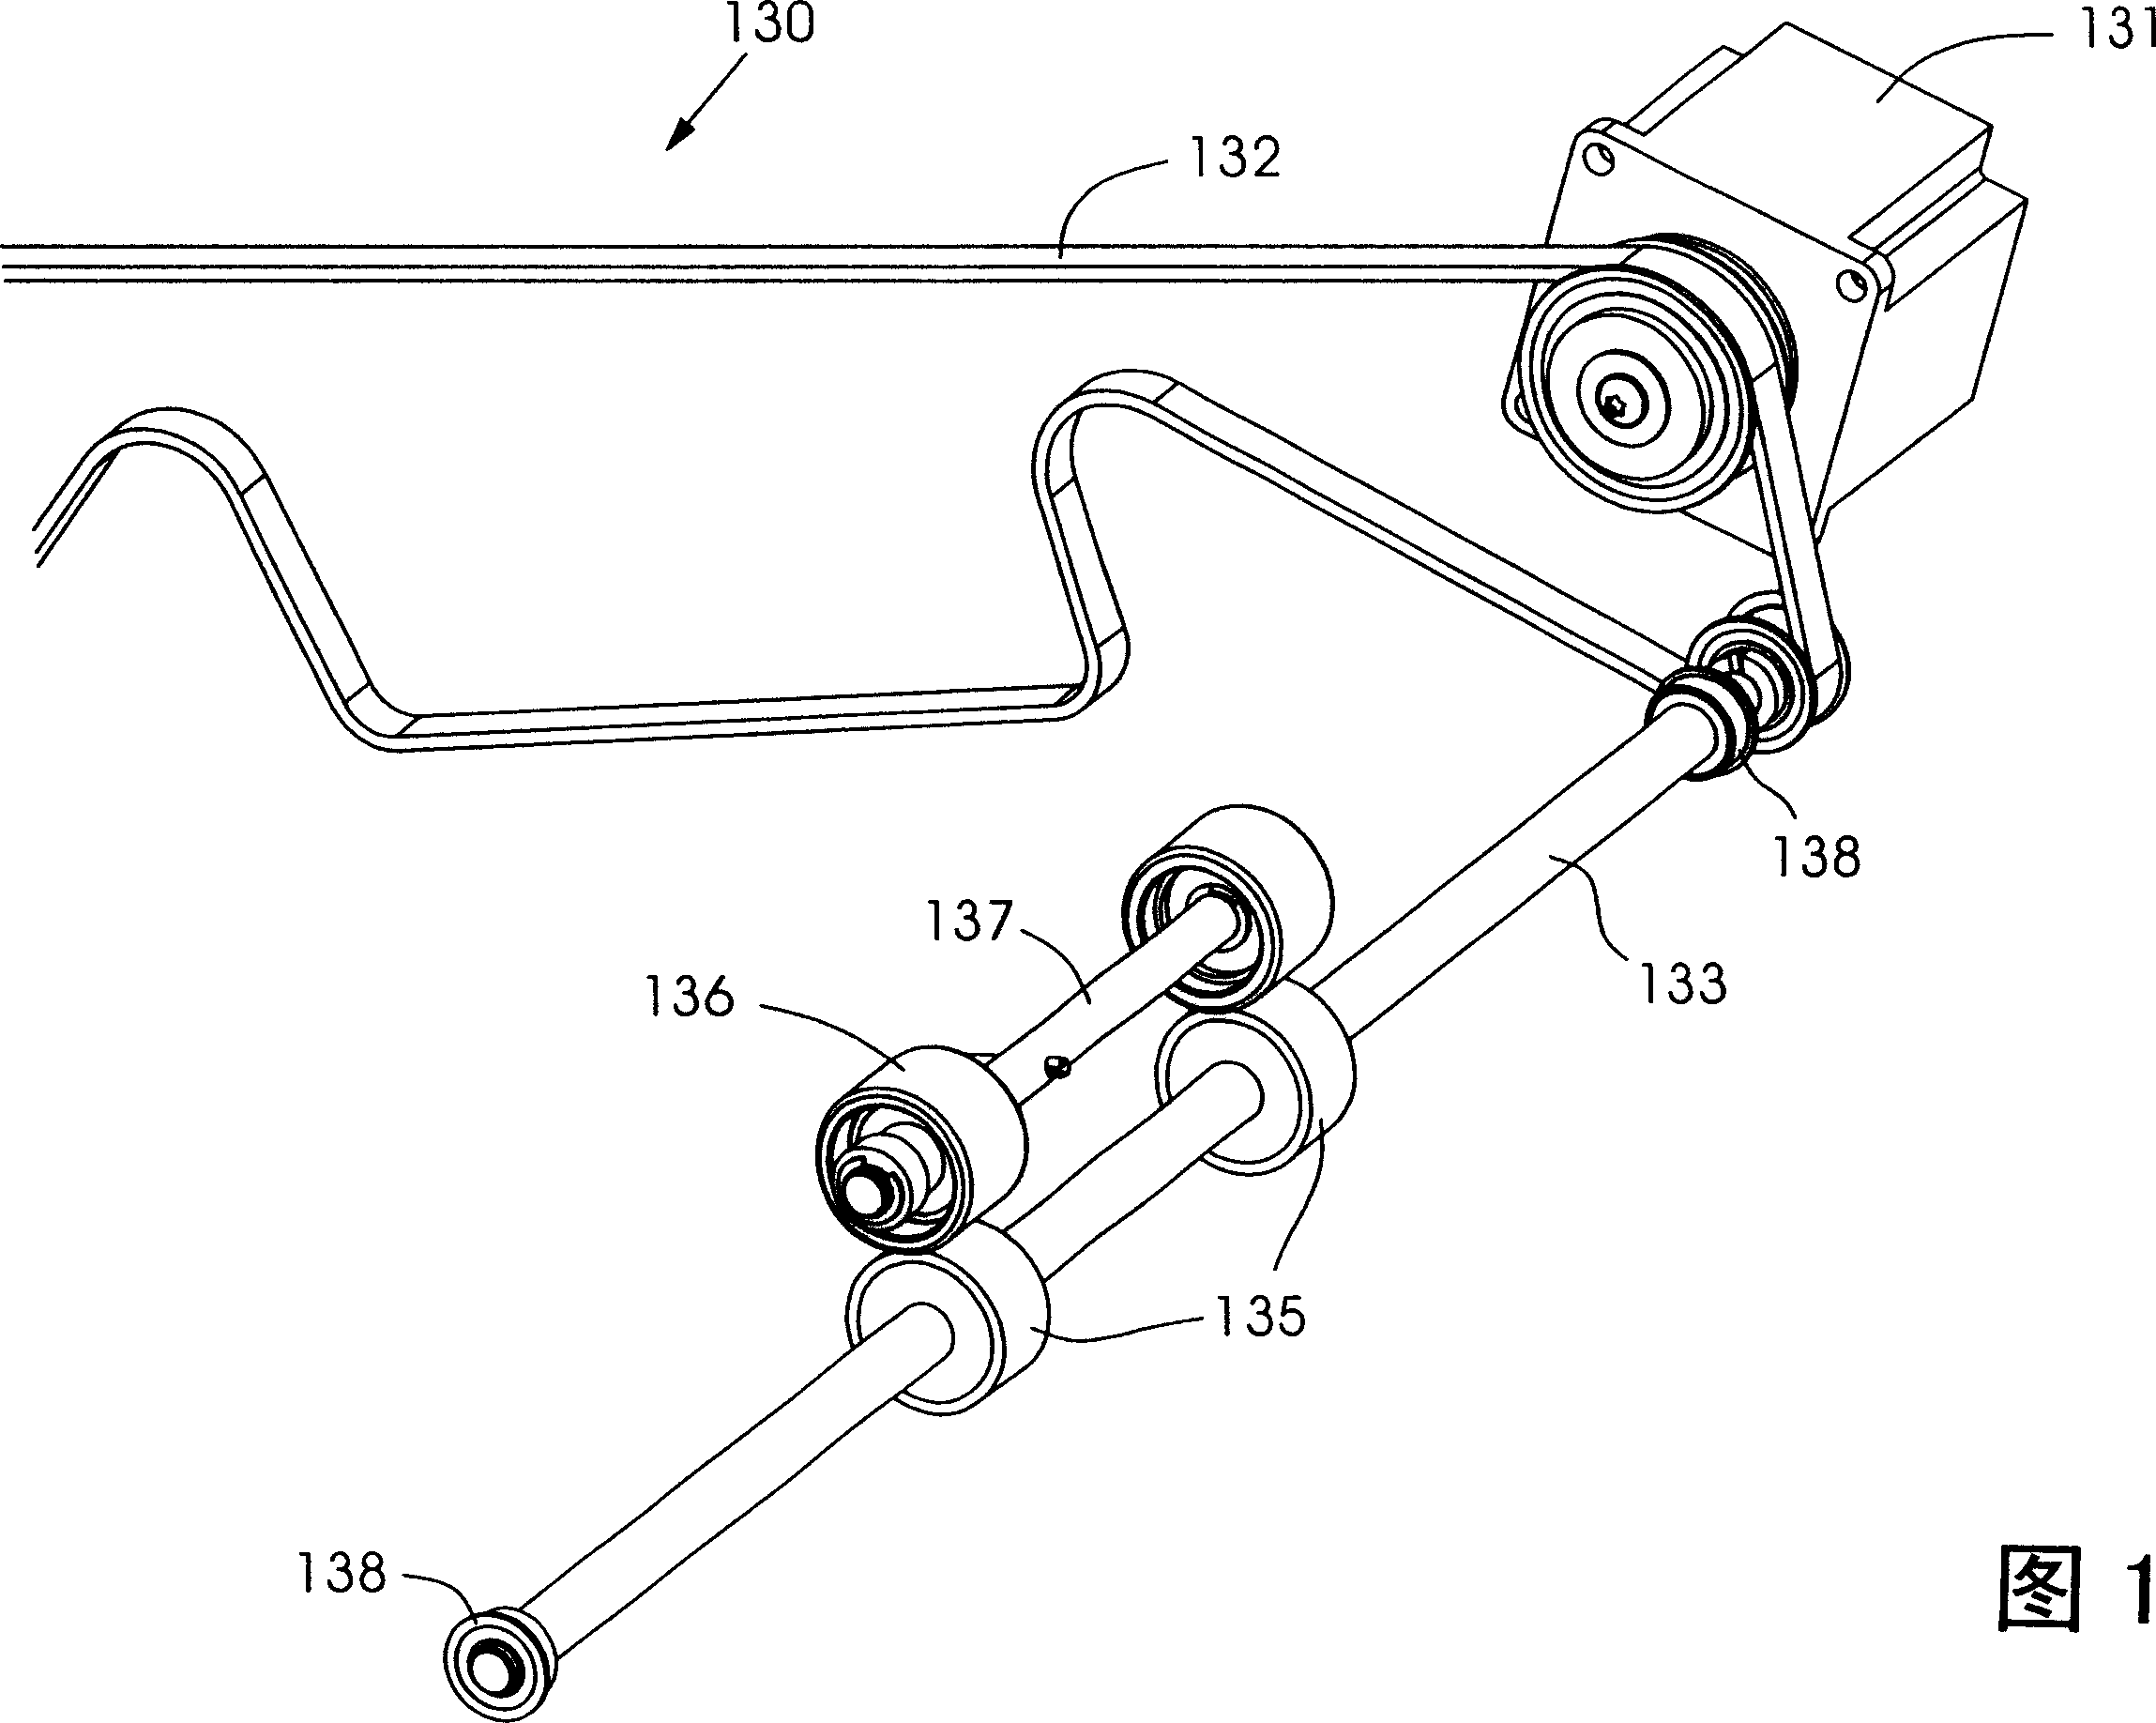 Device used for delivering quiding plane material